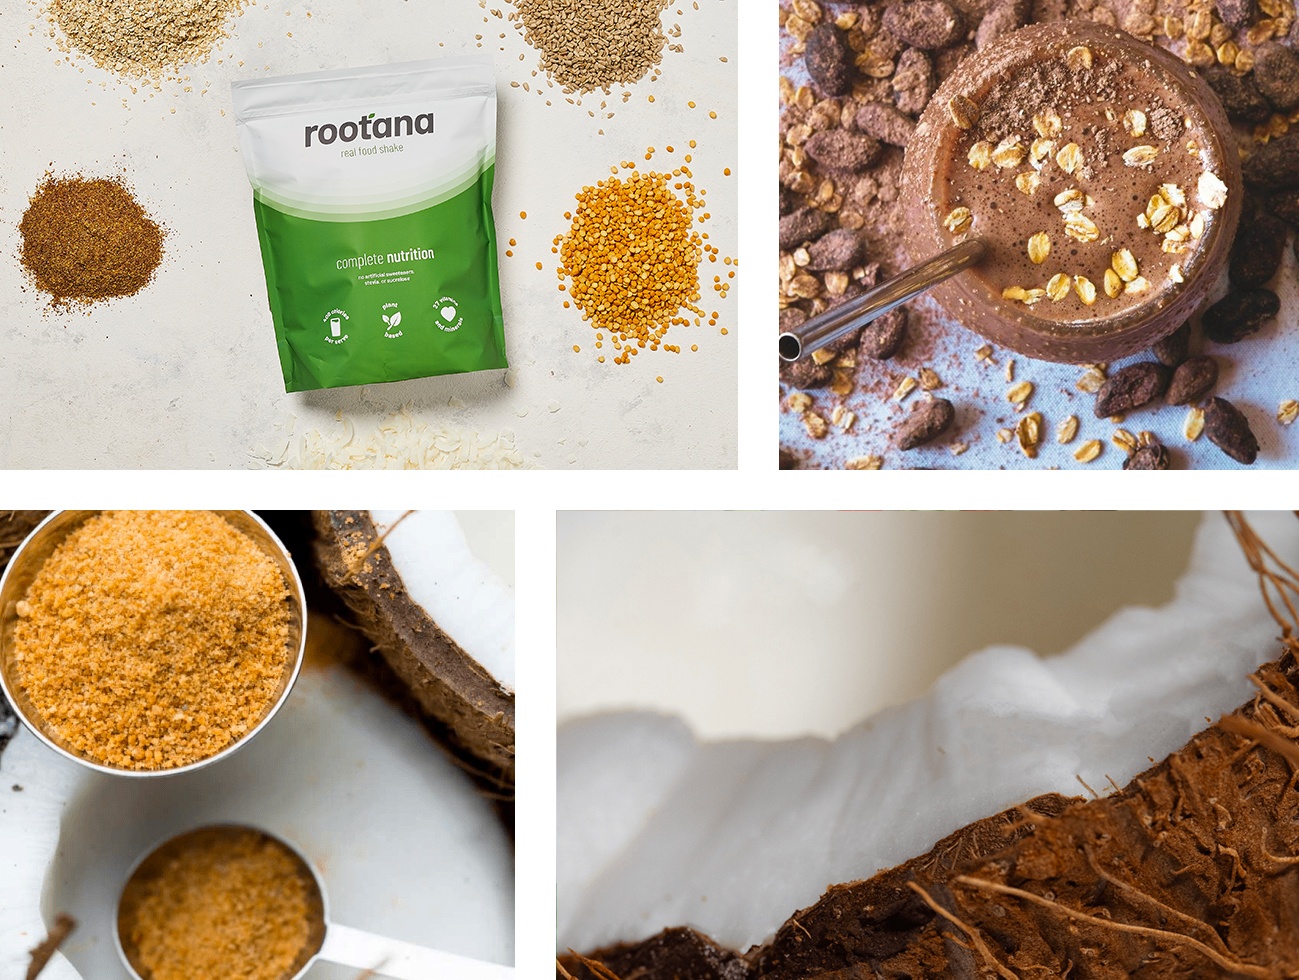 Rootana products and ingredients